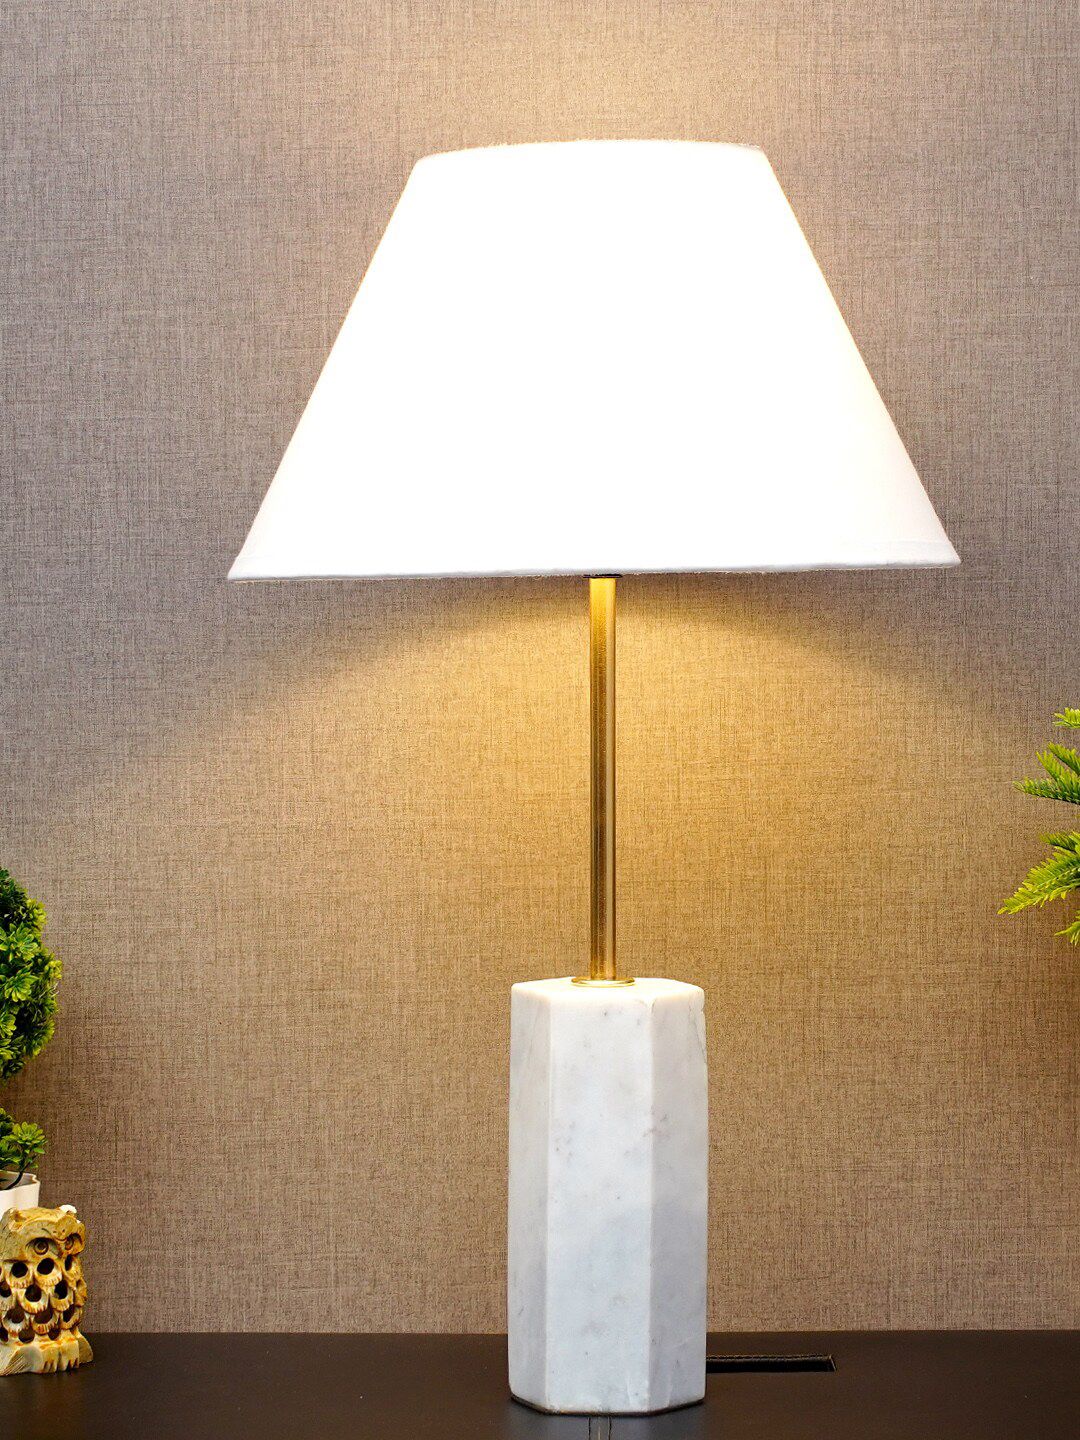 THE LIGHT STORE White Self-Design Bedside Standard Lamp Price in India